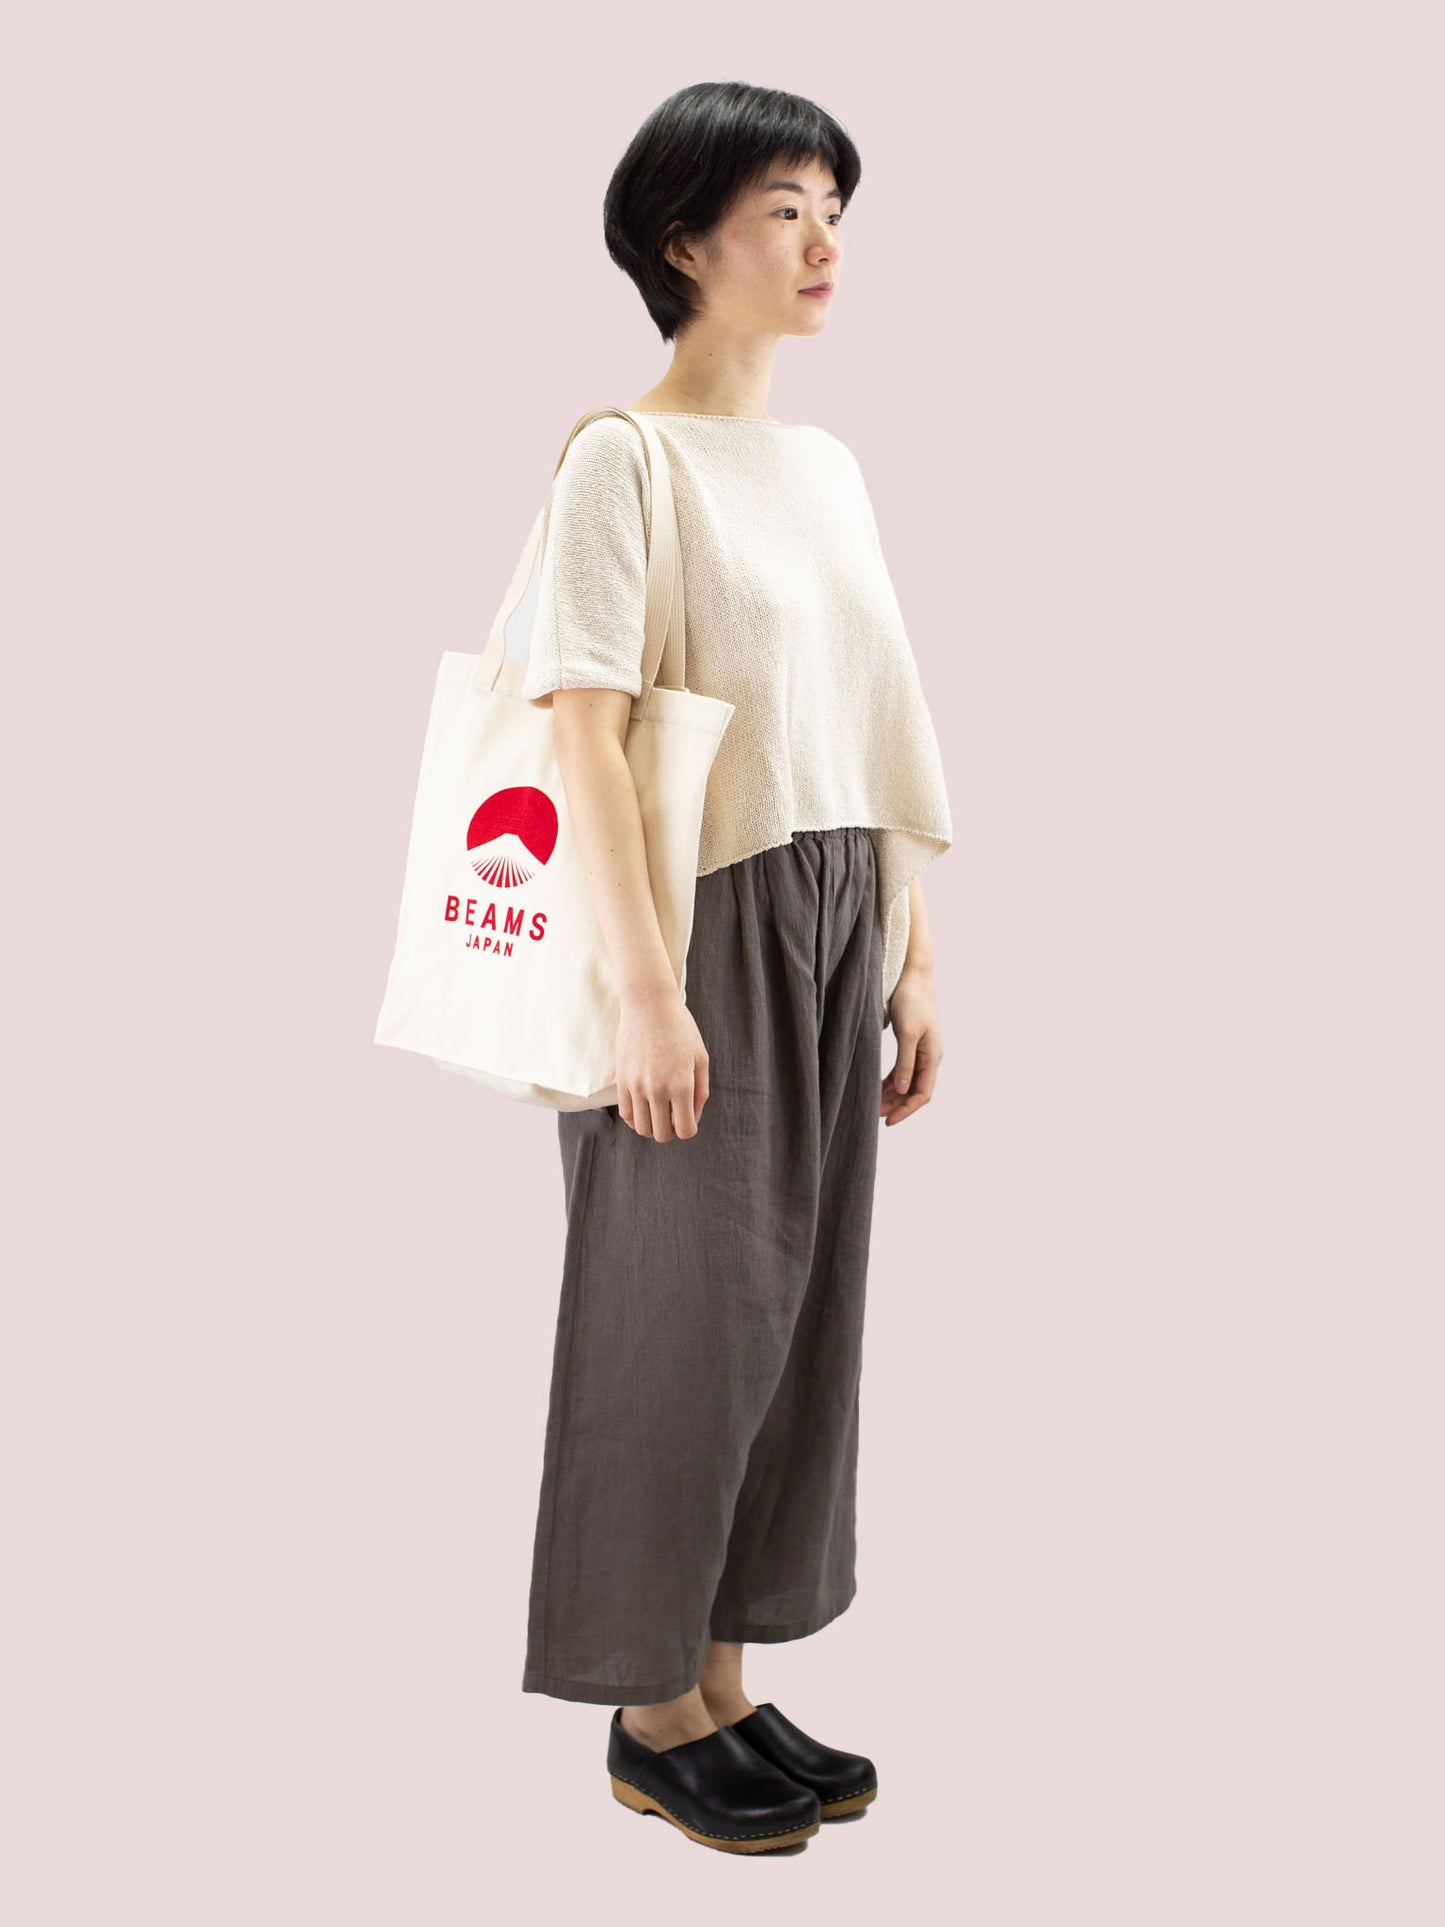 EVERGREEN WORKS X BEAMS Japan Tote Bag (White X Red)